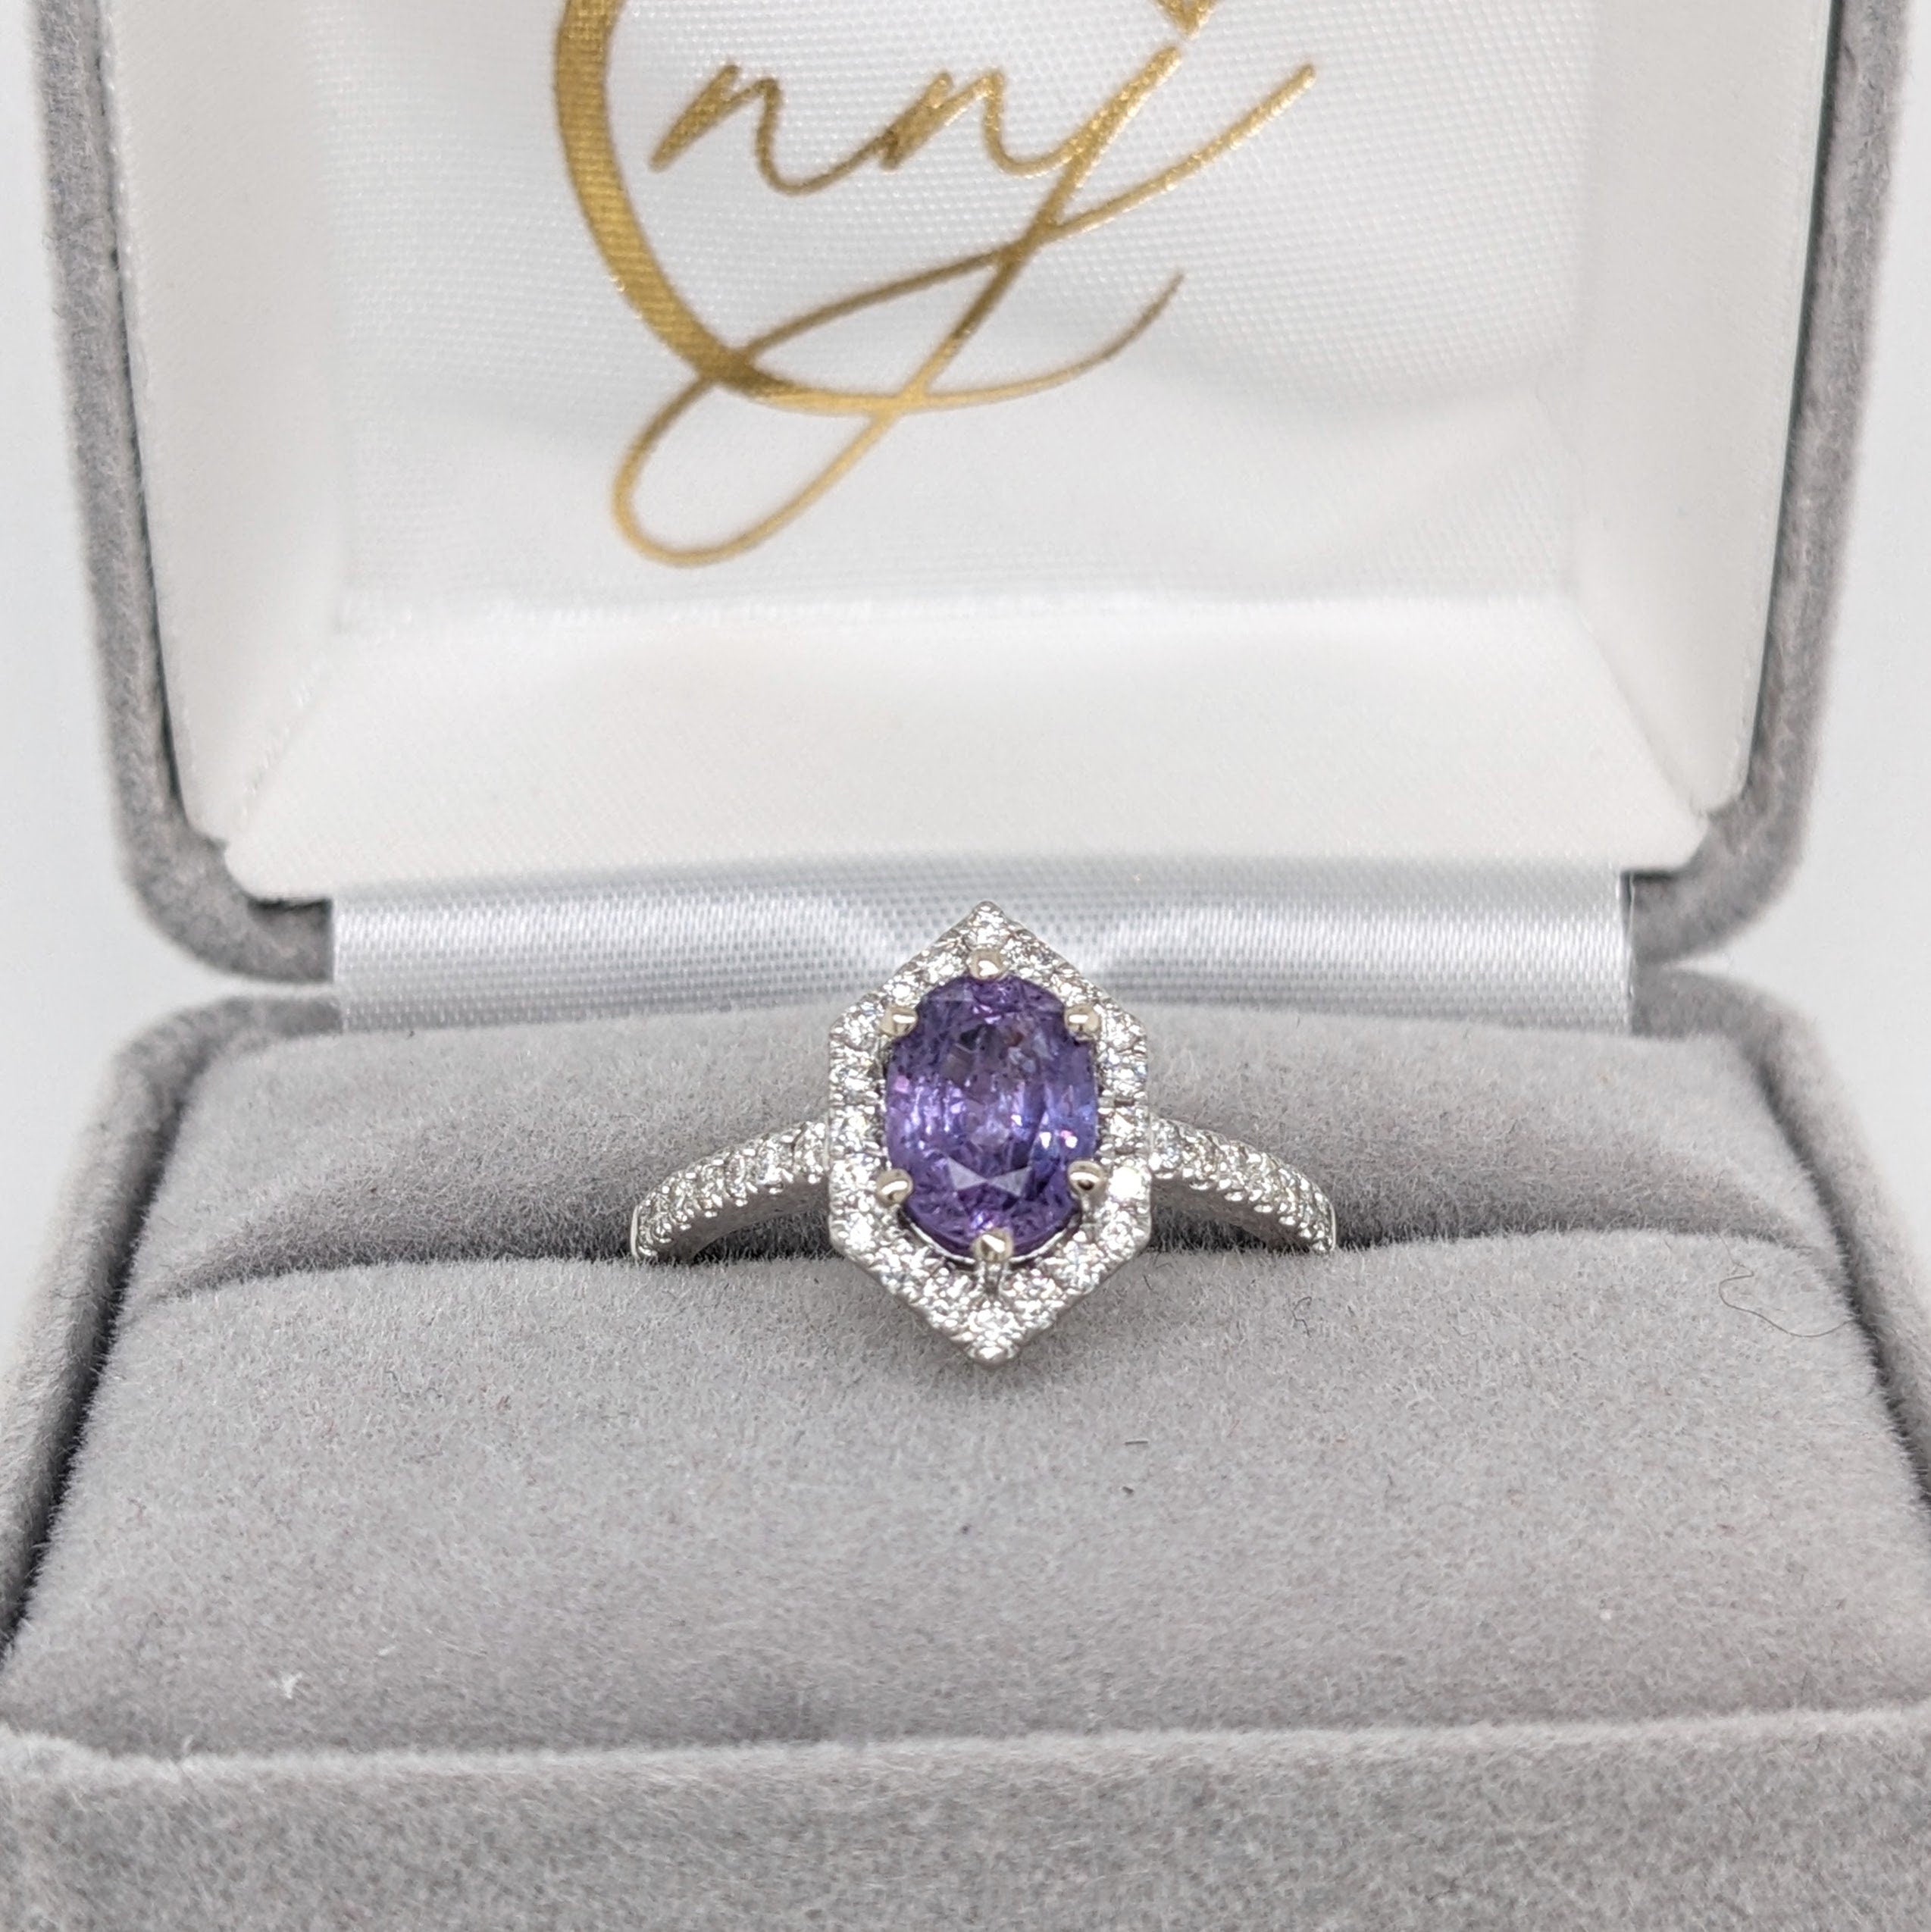 Beautiful Purple Sapphire Ring w Natural Diamond Halo in Solid 14k White Gold | Oval 8x6mm | Pave Band | September Stone | Purple Gemstone